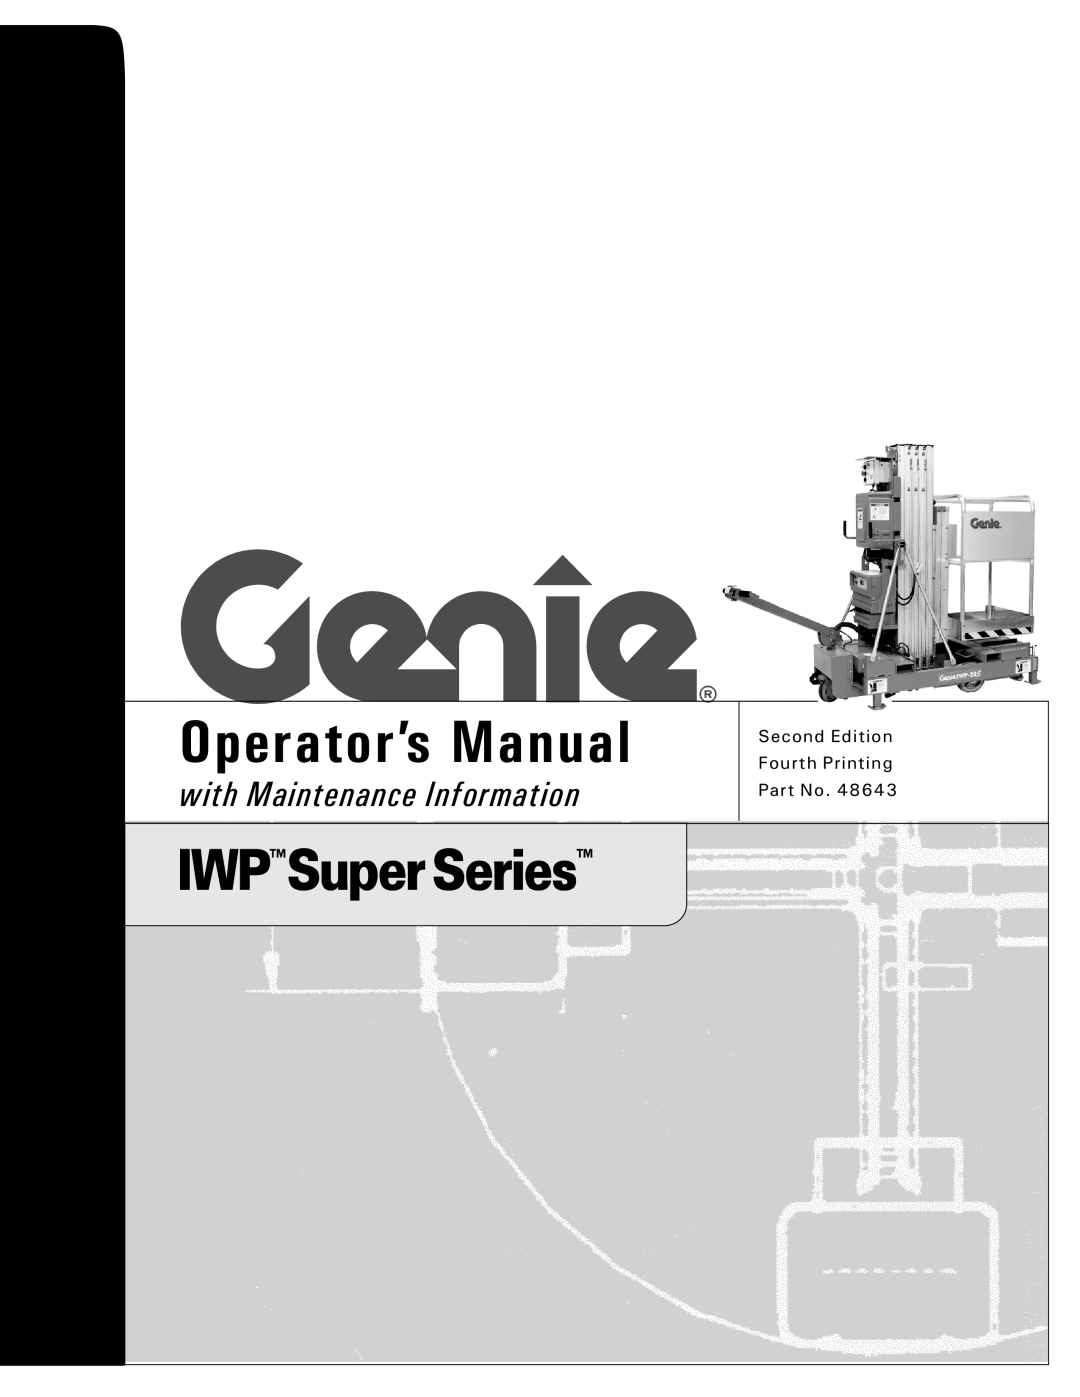 Genie 48643 manual Operator’s Manual, with Maintenance Information, Second Edition Fourth Printing Part No 